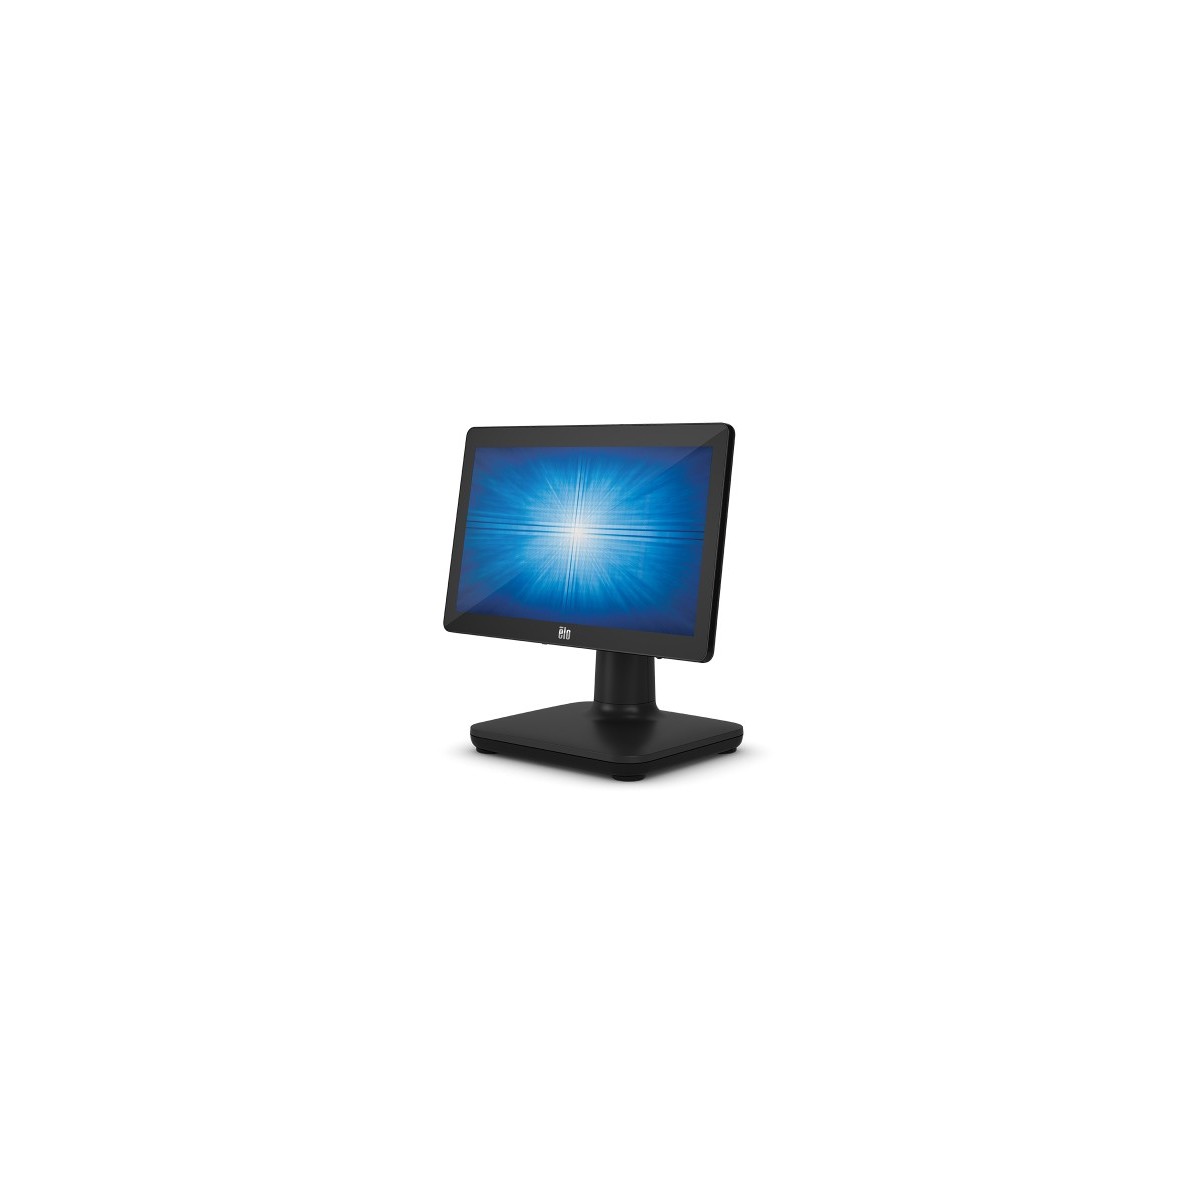 Elo Touch Solutions Elo Touch Solution EloPOS - 38.1 cm (15") - 1366 x 768 pixels - LCD - 220 cd/m² - Projected capacitive syste